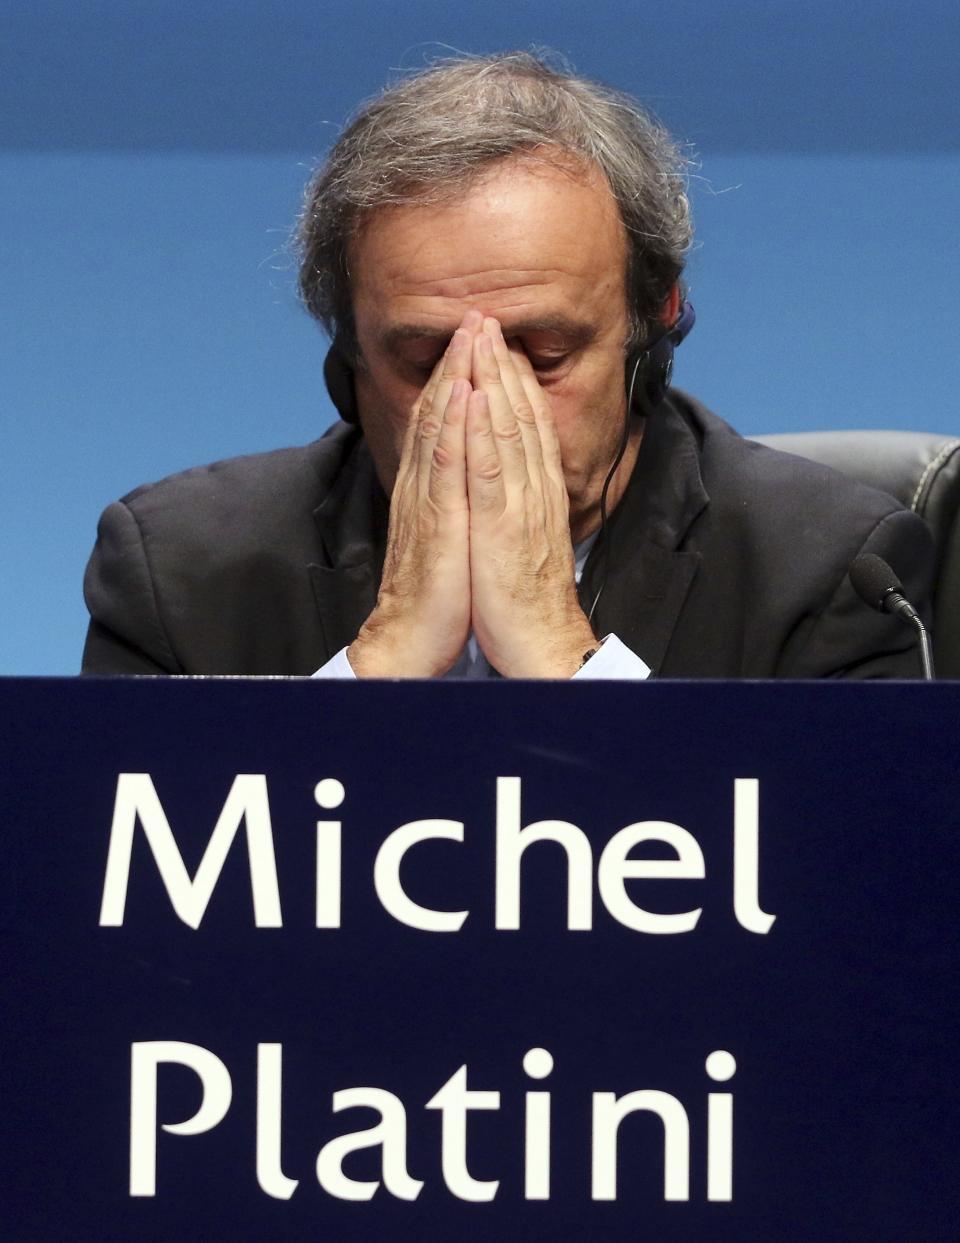 FILE - In this Tuesday, March 24, 2015 file photo UEFA President Michel Platini covers his face during a news conference at the end of the 39th Ordinary UEFA Congress in Vienna, Austria. Former UEFA president Michel Platini has been arrested Tuesday June 18, 2019 over the awarding of the 2022 World Cup. (AP Photo/Ronald Zak, File)